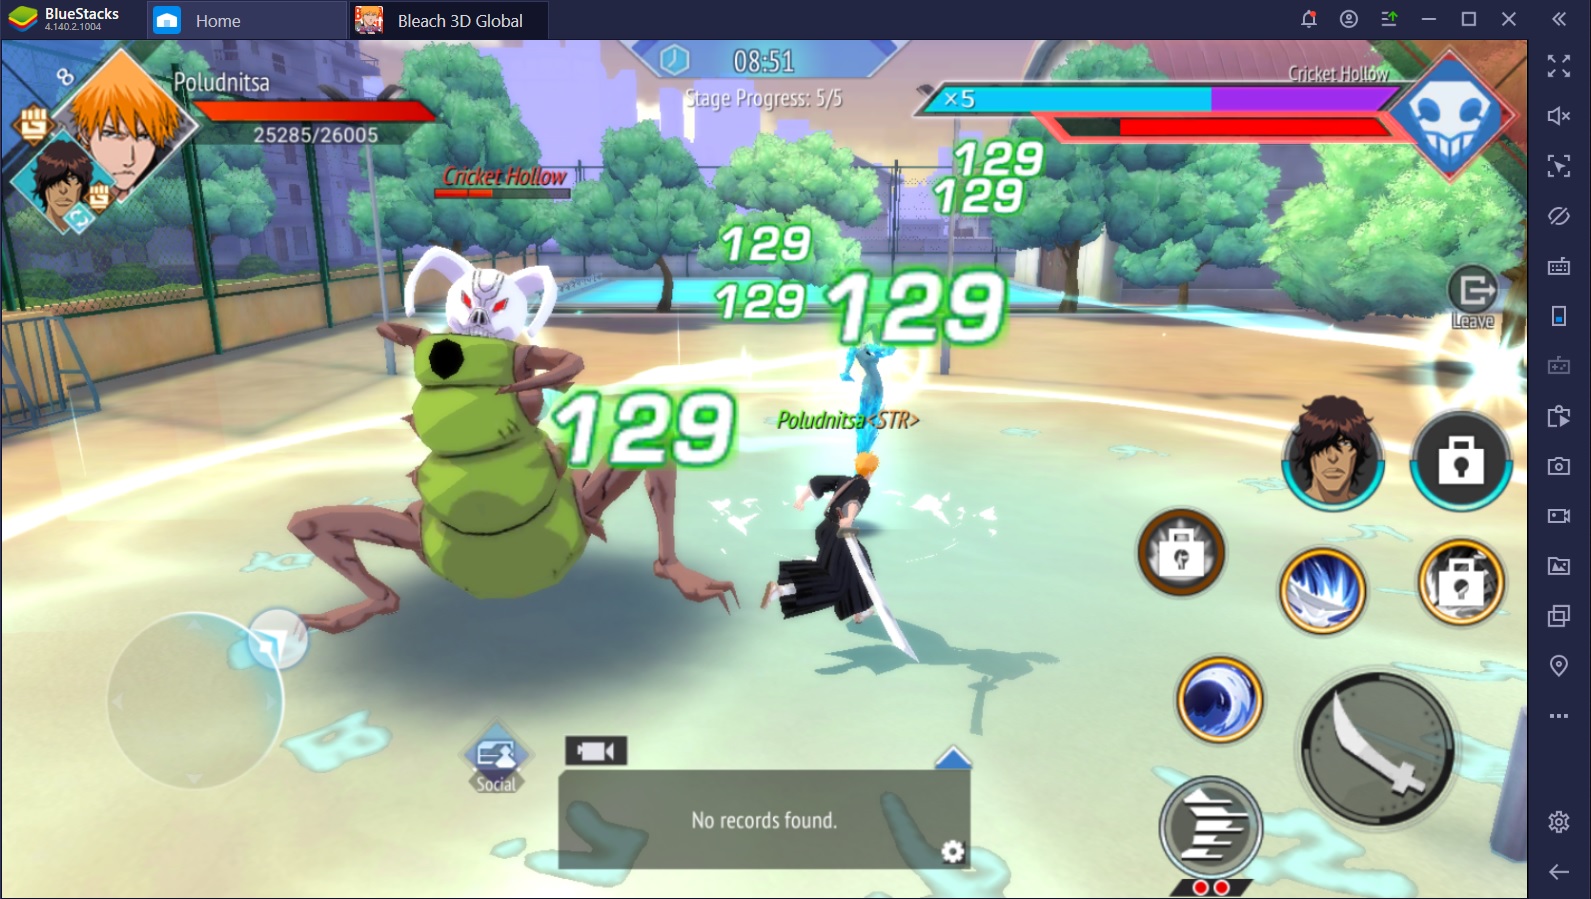 BLEACH Mobile 3D on PC: The Complete Combat Guide for Beginners